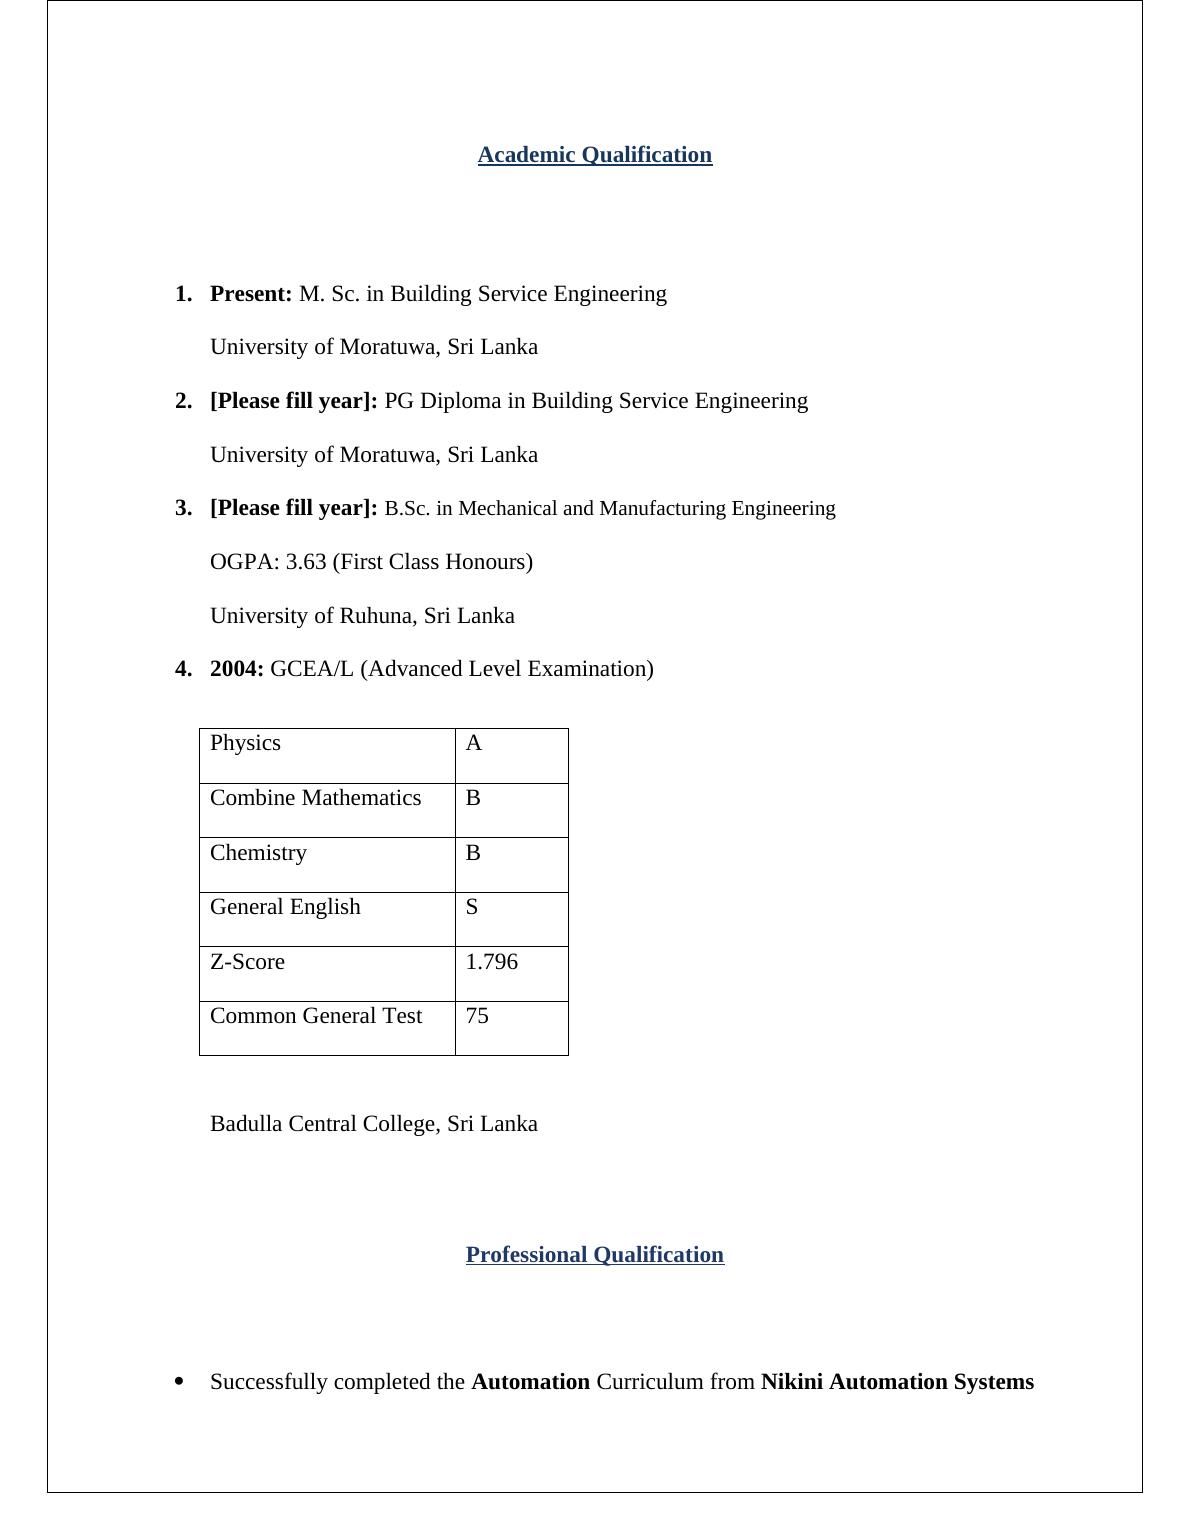 Career Profile : Assignment_2